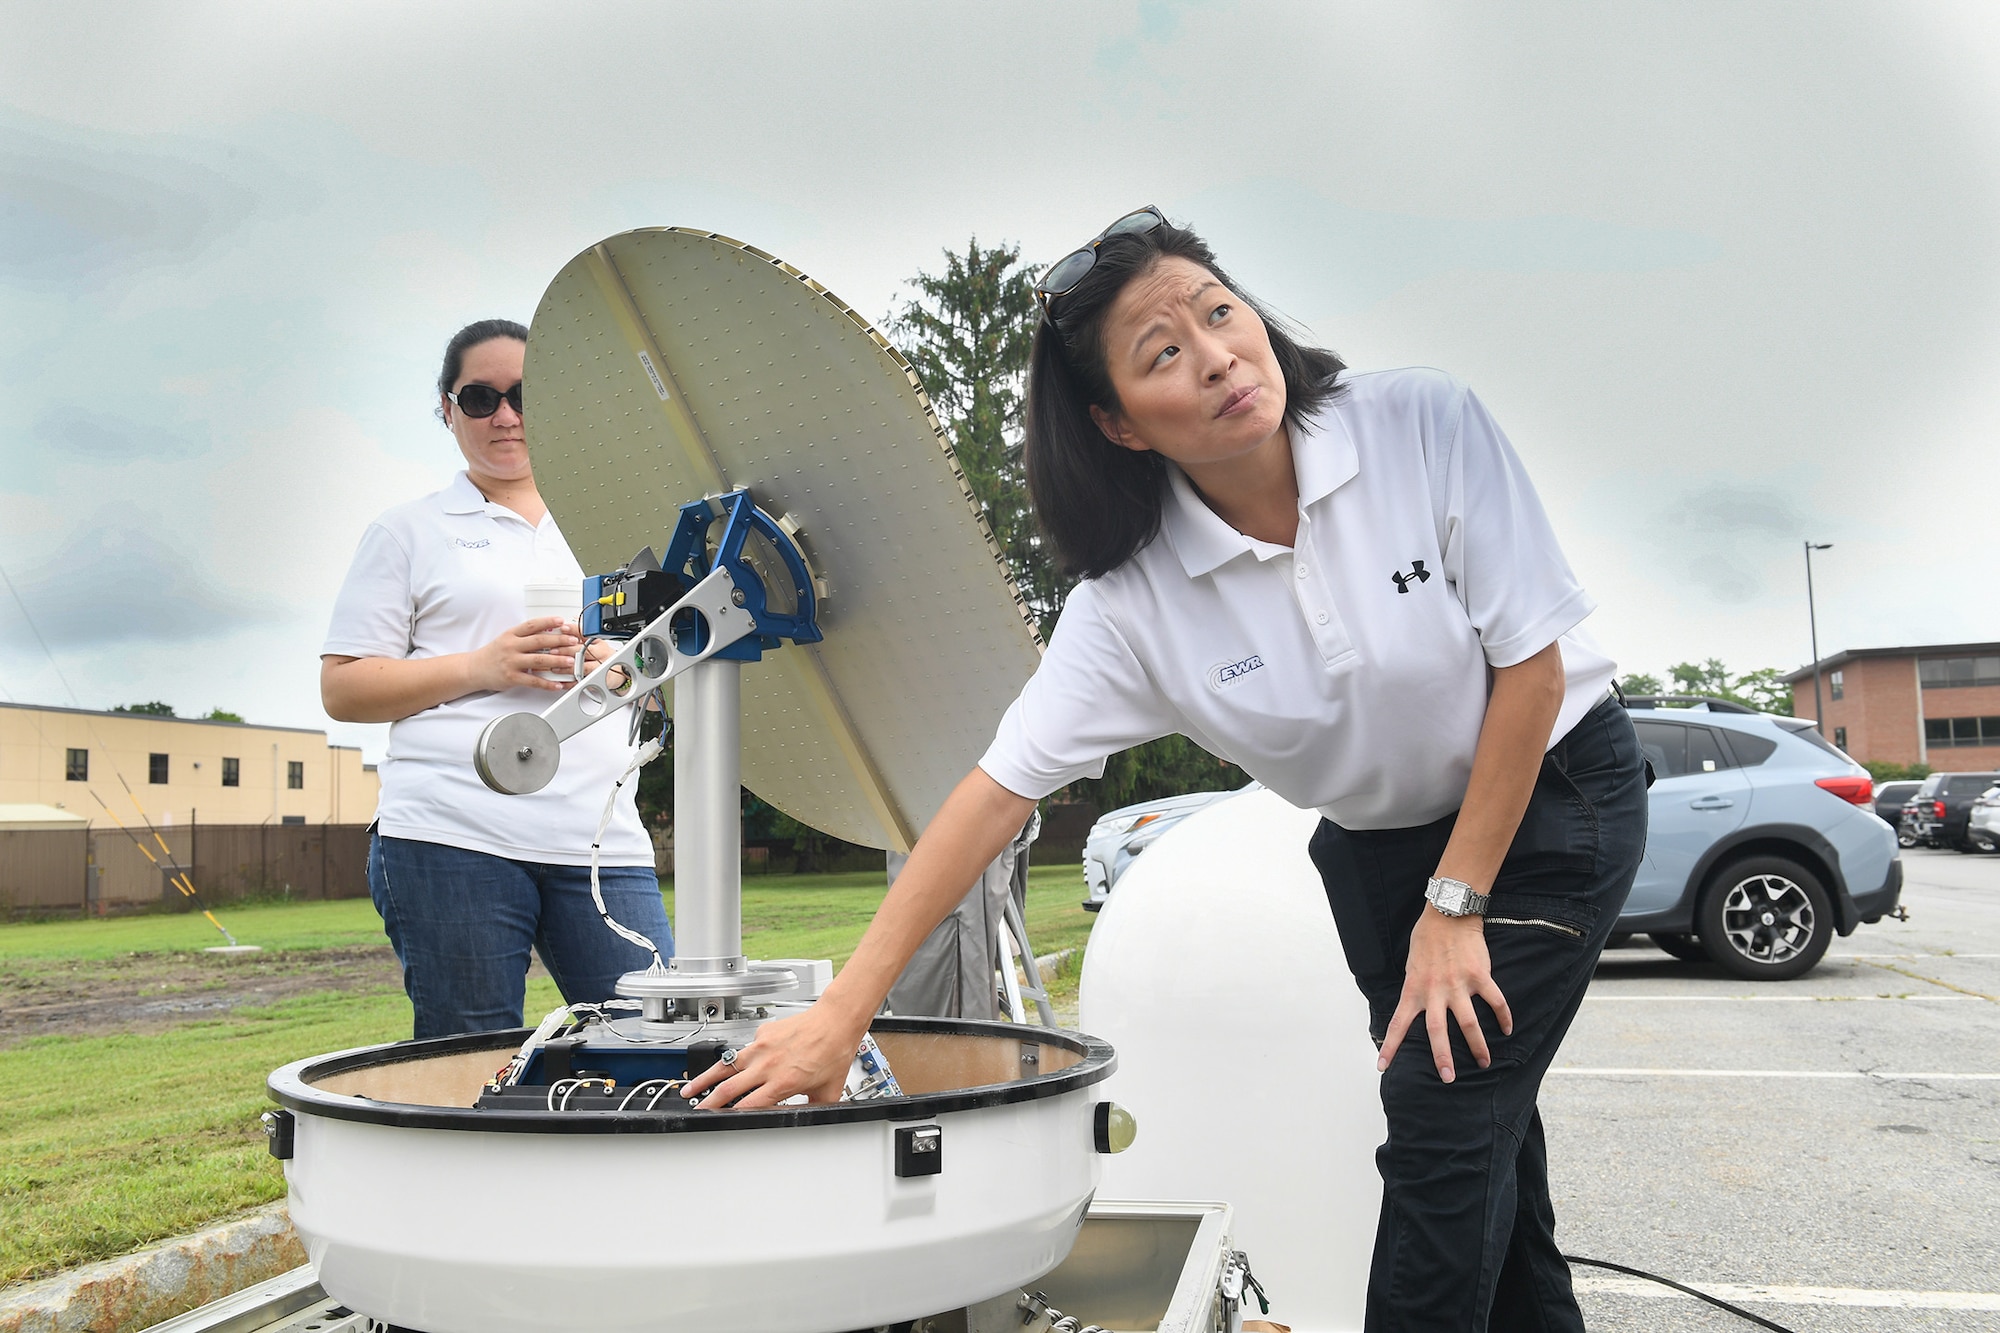 Margaret Williams, right, vice president of EWR Radar Inc., speaks to base personnel about the doppler radar system installed Aug. 14 at the Hanscom Air Force Base, Mass., weather engineering facility while Rebecca Williams, EWR contract administrator, looks on. (U.S. Air Force photo by Todd Maki)